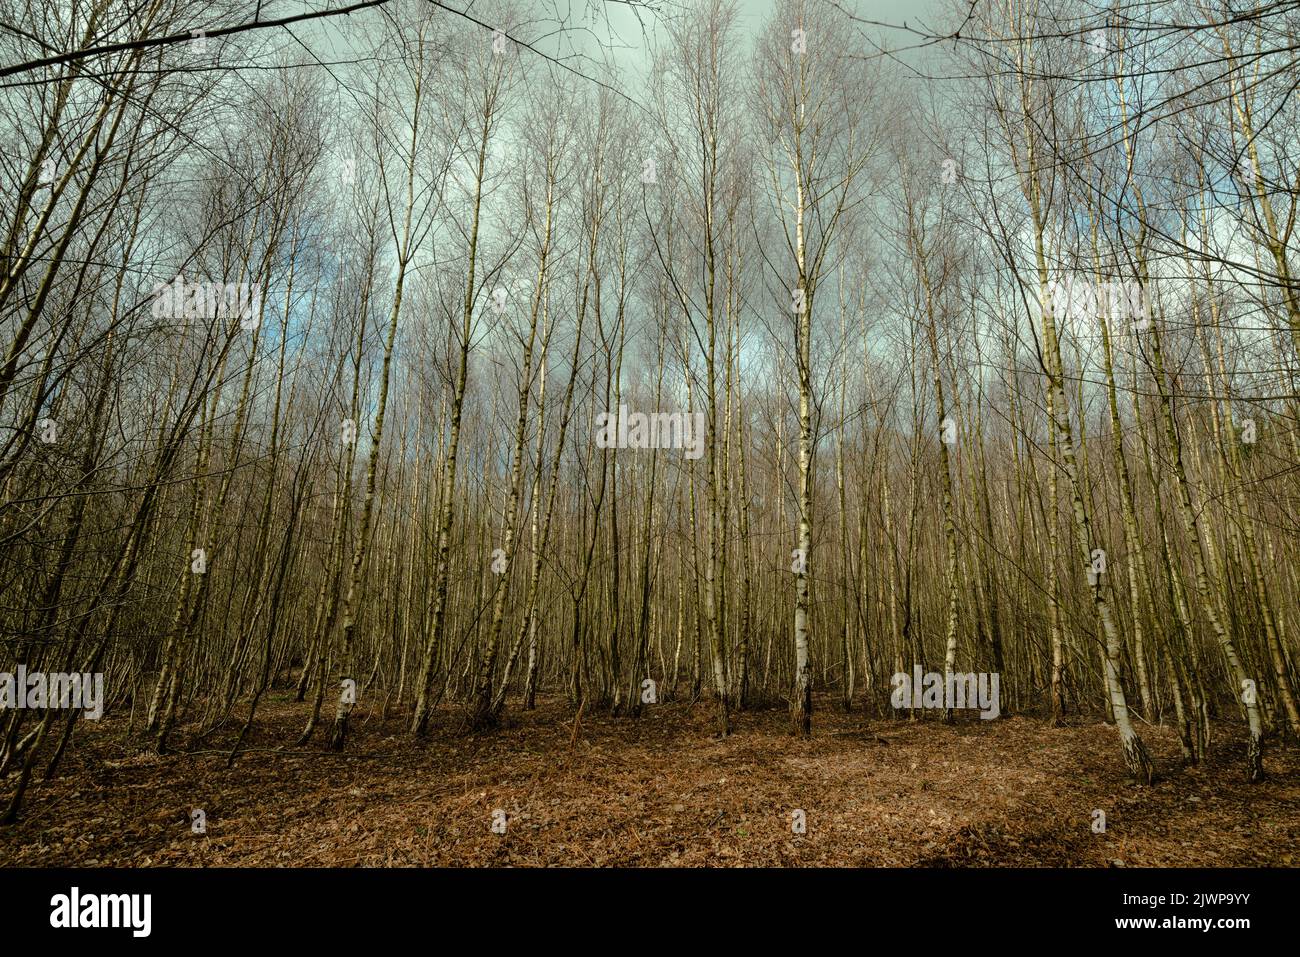 Silver birch trees, copse, dense, young, surrounded at low level Stock Photo